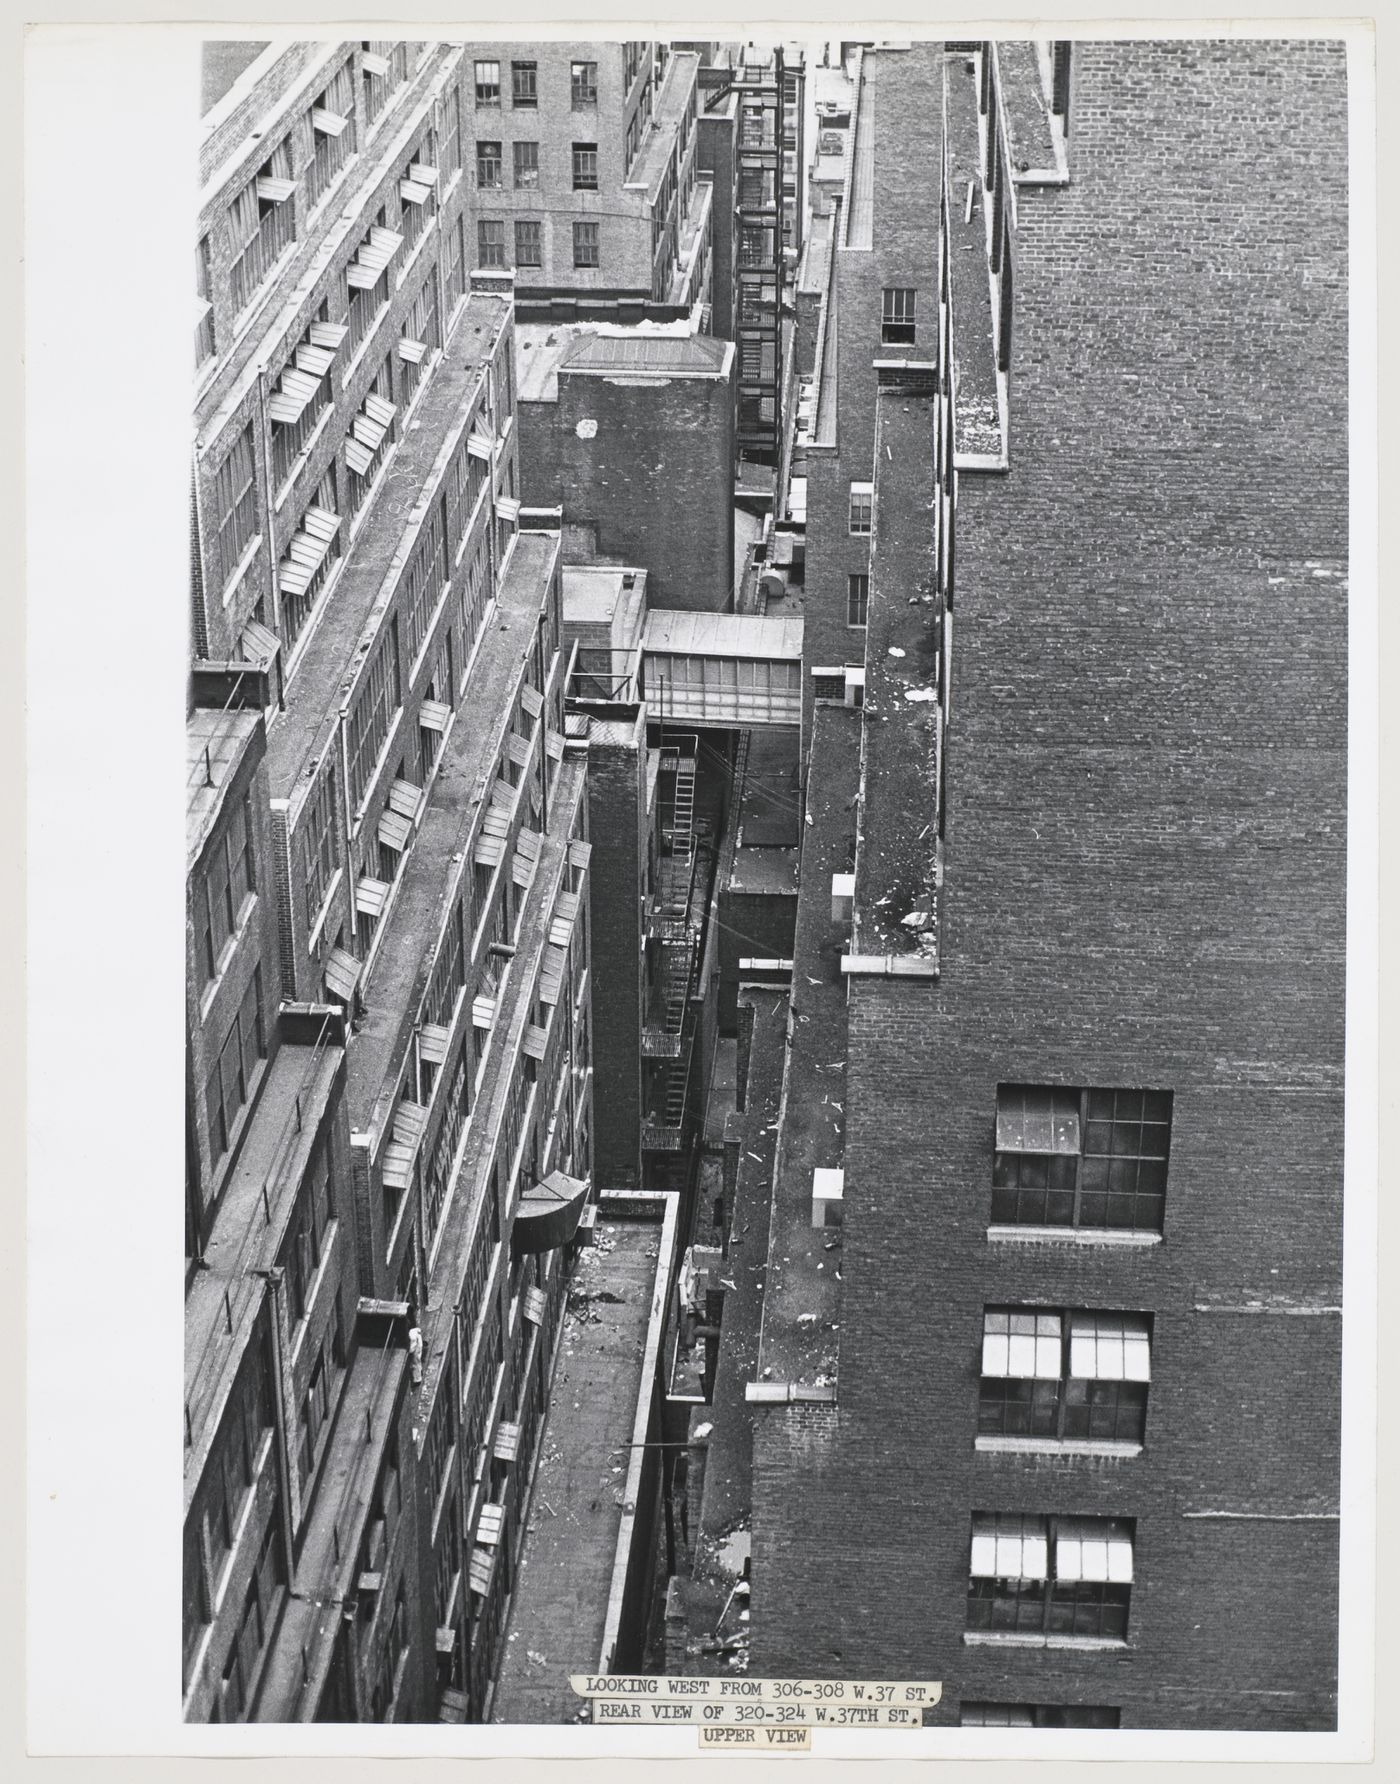 Aerial view of the backs of buildings showing rooftops and the space between buildings, West 37th Street, Manhattan, New York City, New York